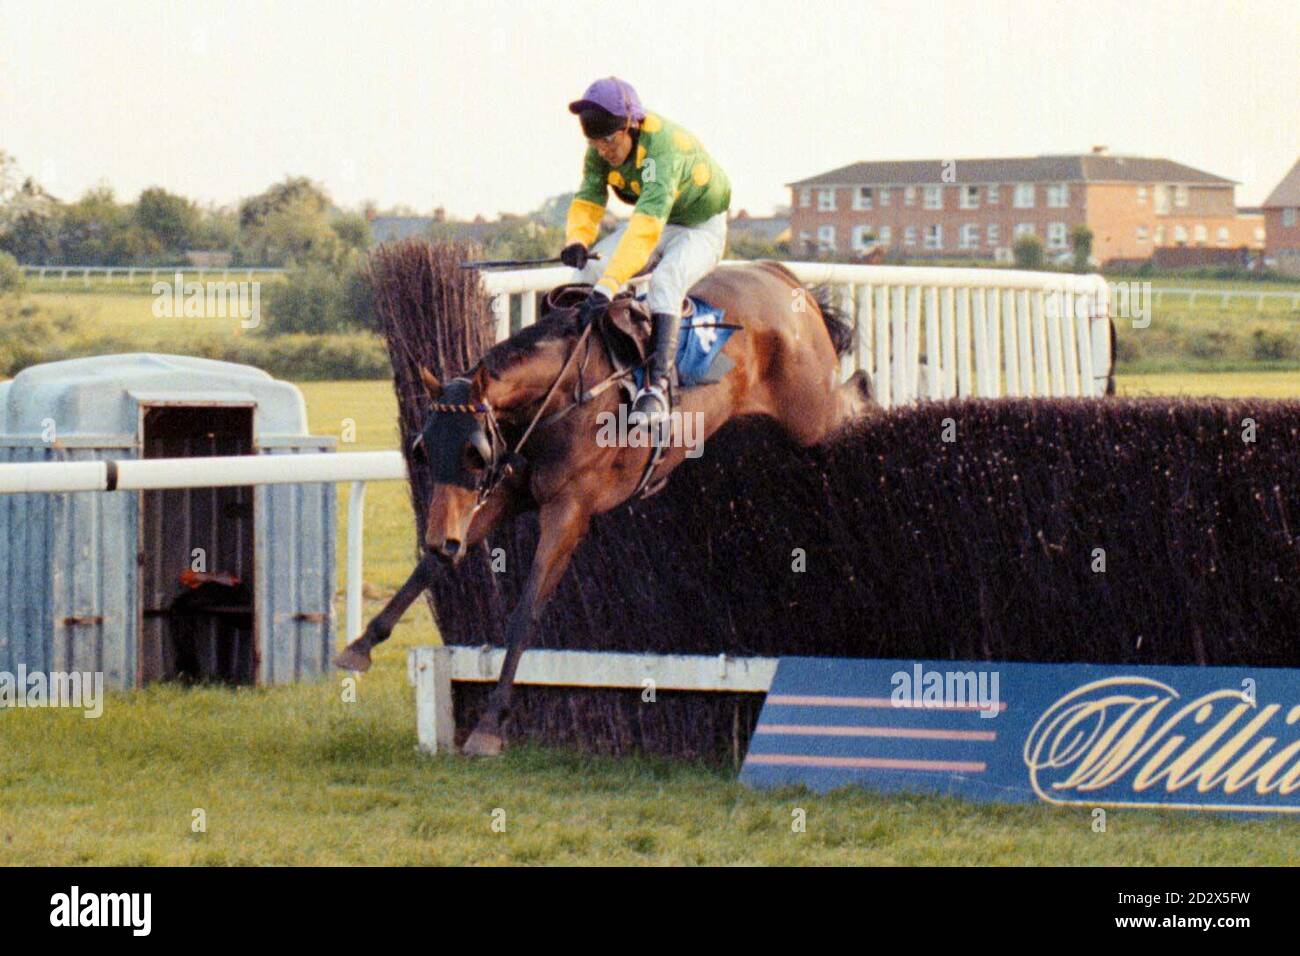 'Robert's Toy' (ridden by David Bridgwater) jumps the last fence before winning to give trainer Martin Pipe his 2000th victory at Hereford races. Stock Photo